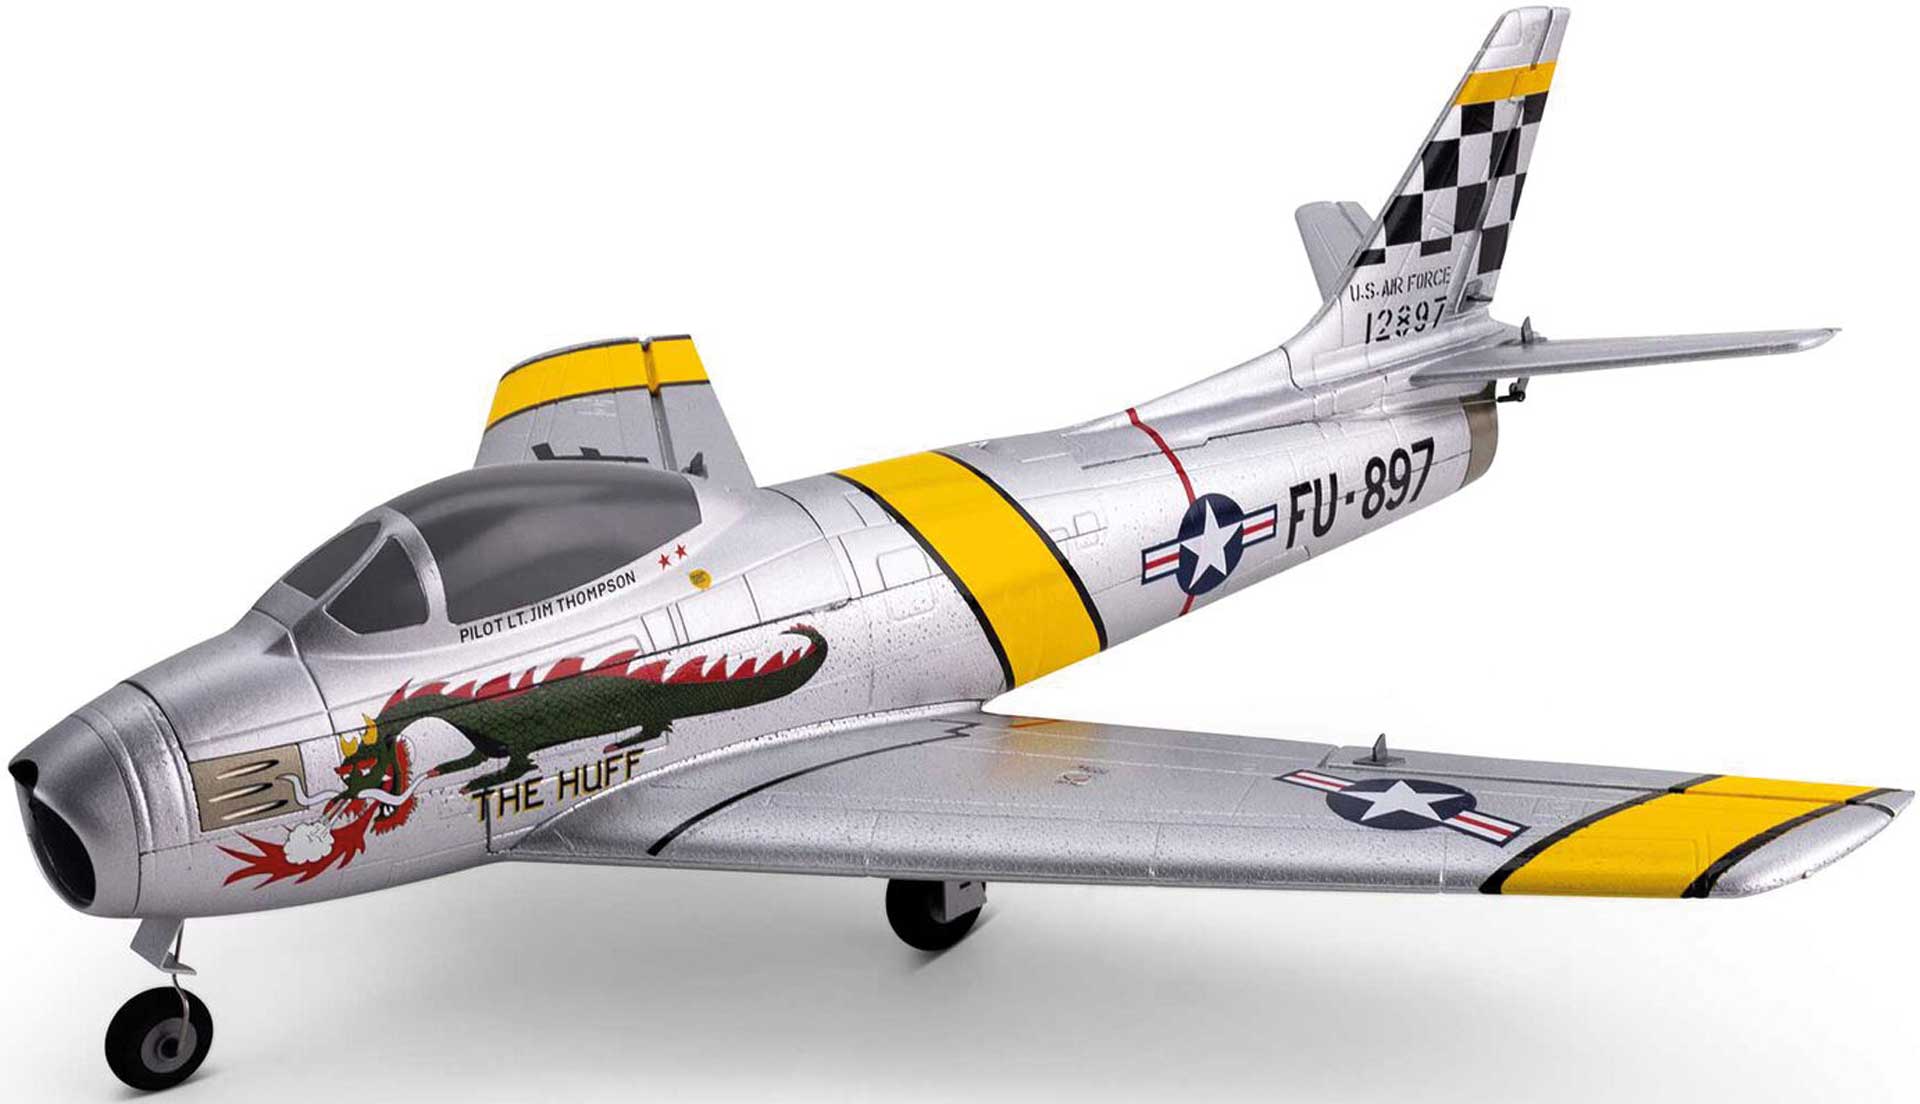 E-FLITE UMX F-86 Sabre 30mm EDF Jet BNF Basic with AS3X and SAFE Select